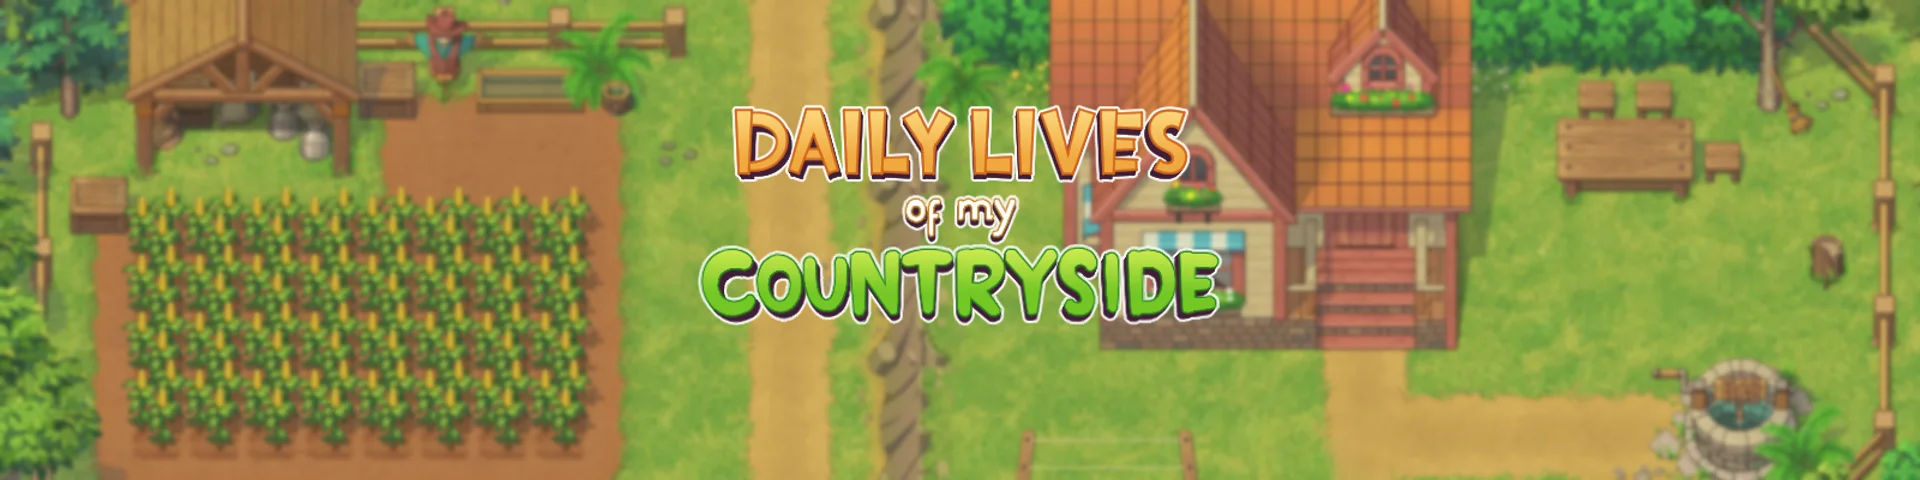 Daily Lives of My Countryside v.0.3.0